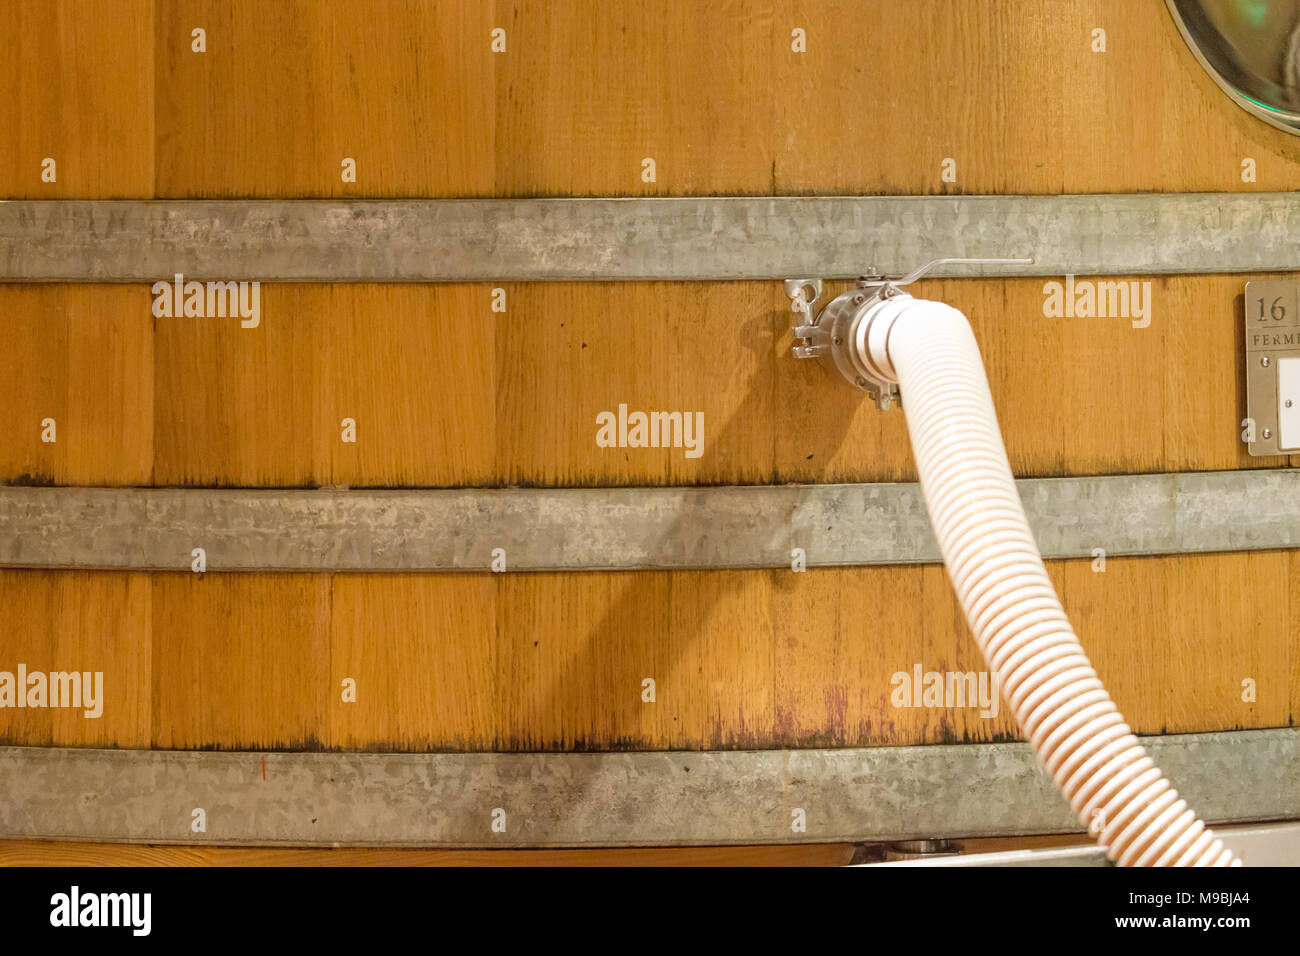 A hose going into a tank of wine at a winery Stock Photo